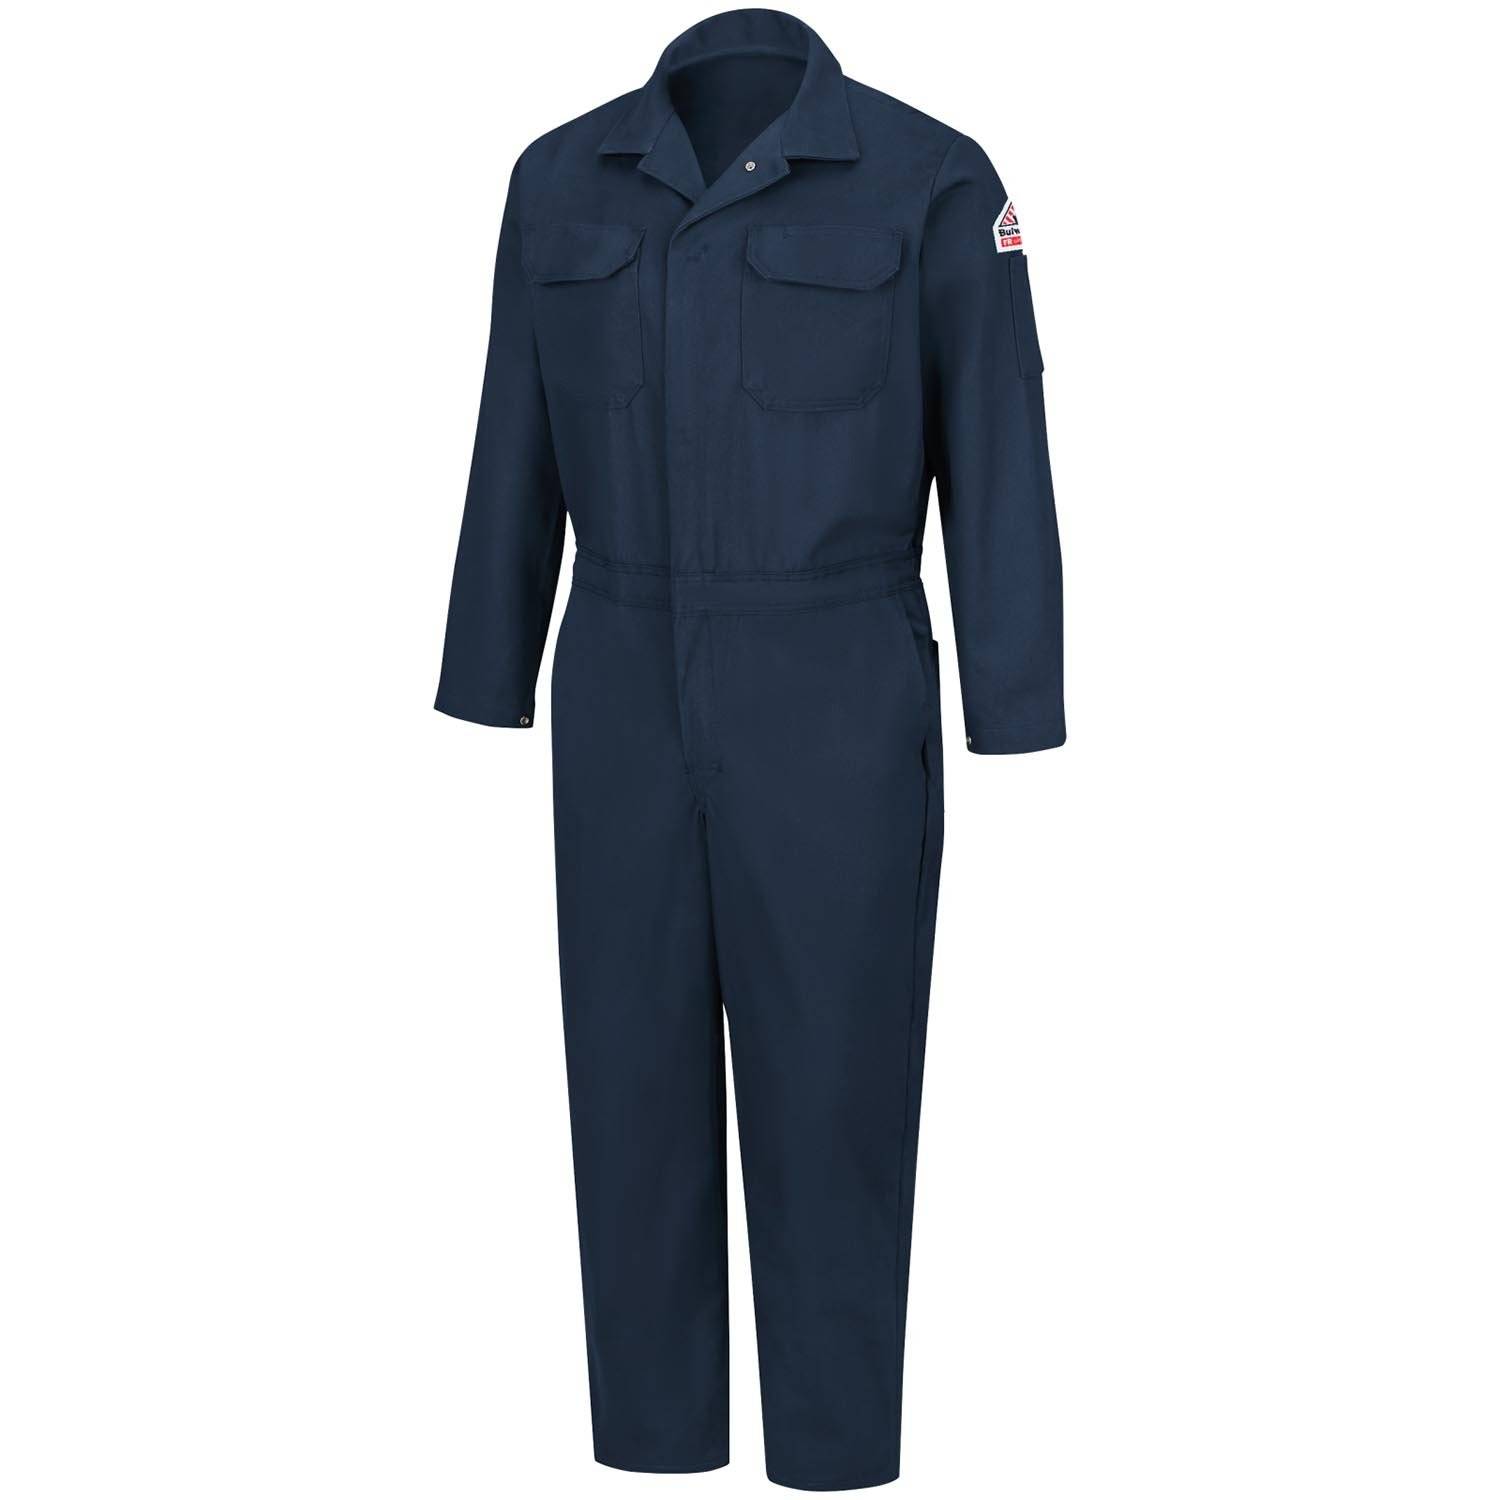 RED KAP MEN'S BULWARK EXCEL FLAME RESISTANT DELUXE COVERALL